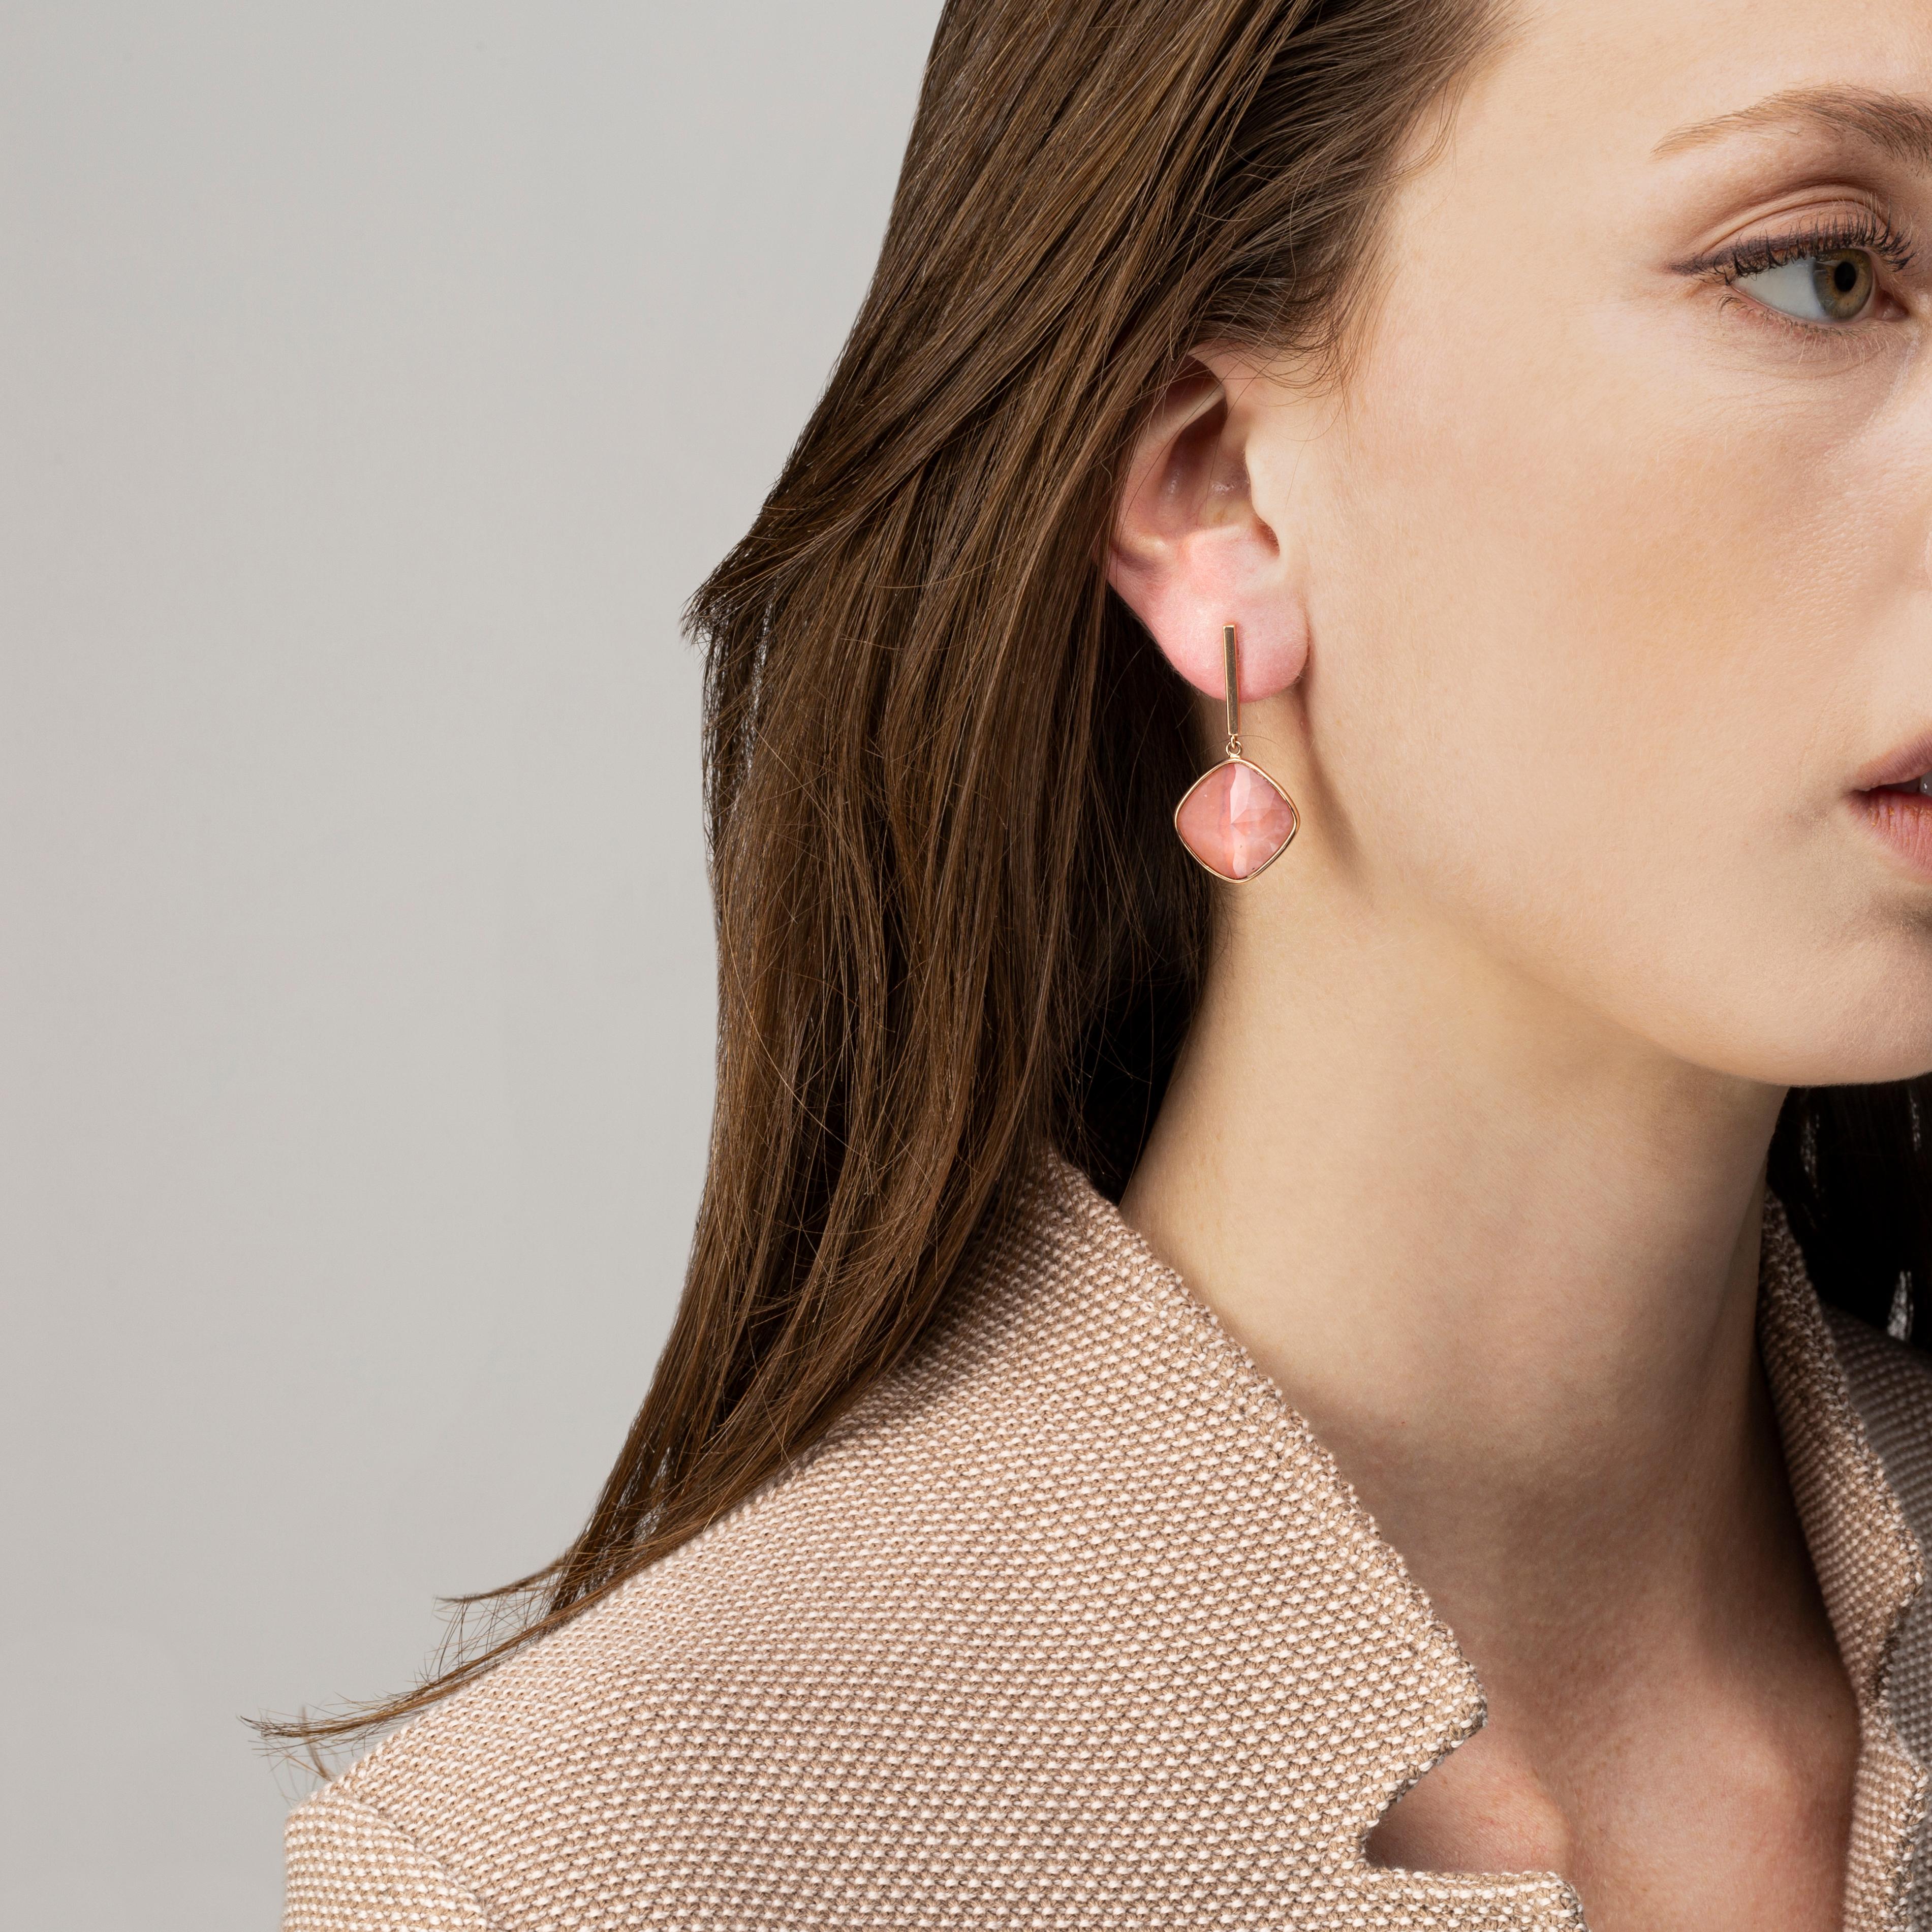 Alex Jona design collection, hand crafted in Italy, 18 Karat rose gold drop earrings set with a crazy cut Quartz over Pink Opal. Dimensions : Length mm37/in1.46 - Width mm16.8/in0.66 

Alex Jona jewels stand out, not only for their special design